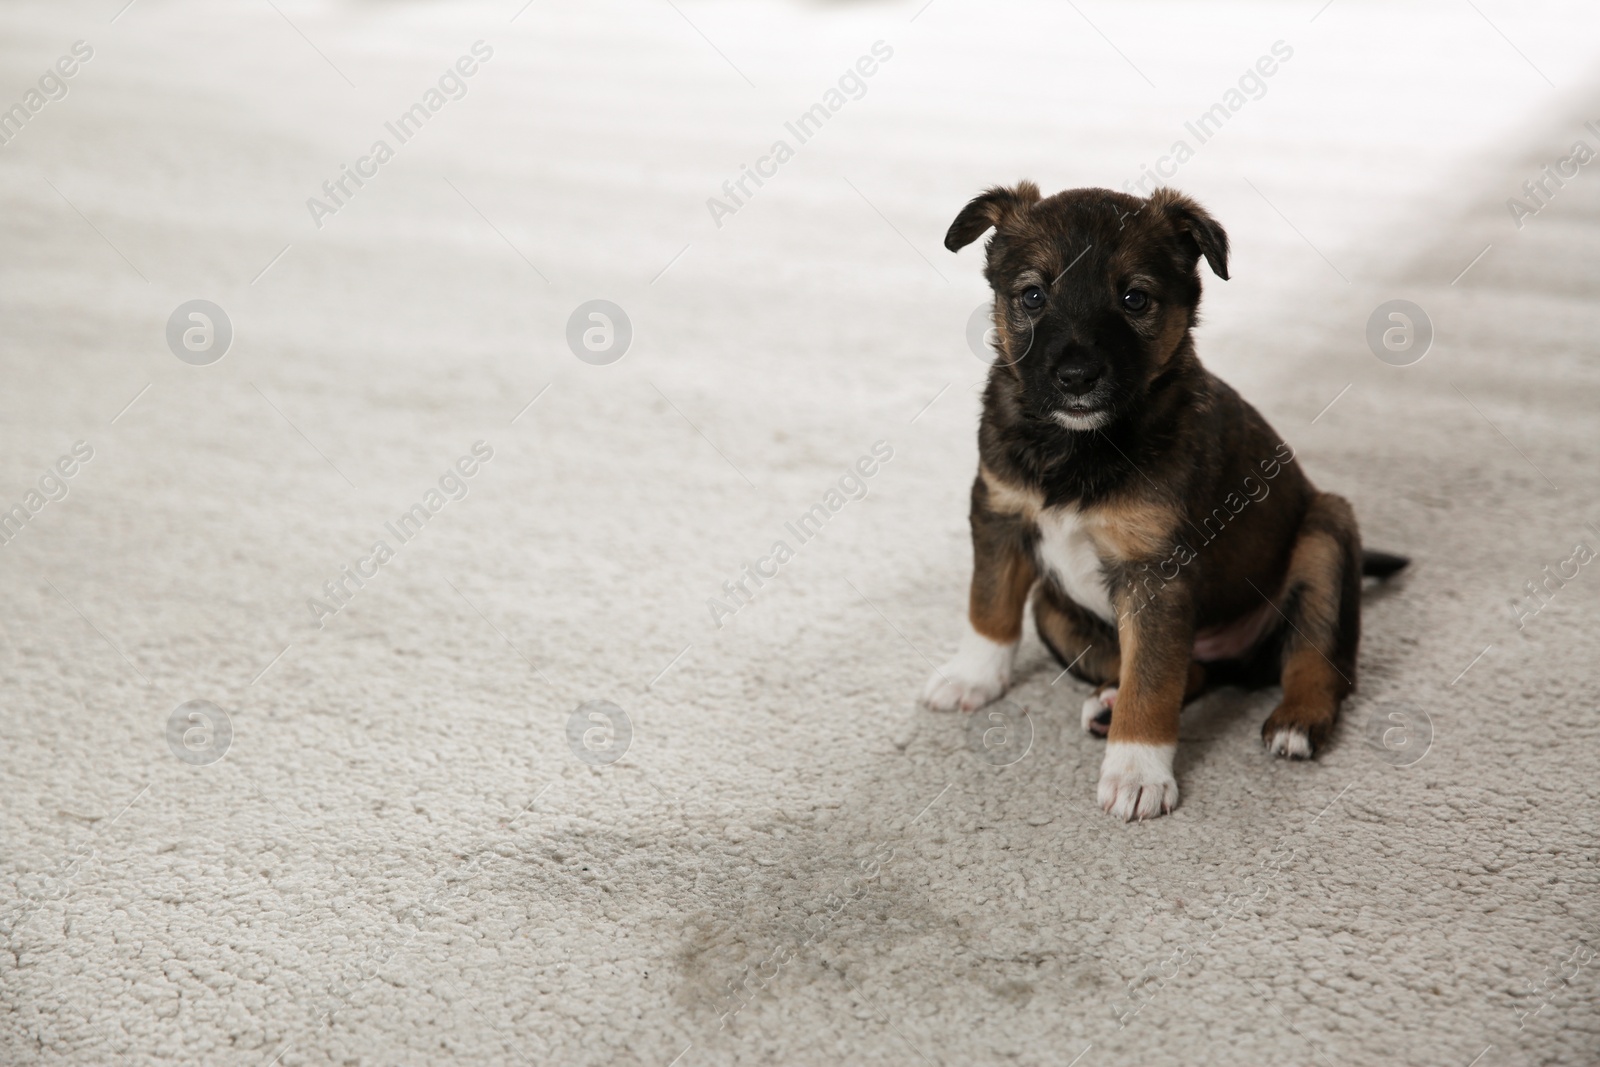 Photo of Adorable puppy near wet spot on carpet indoors. Space for text